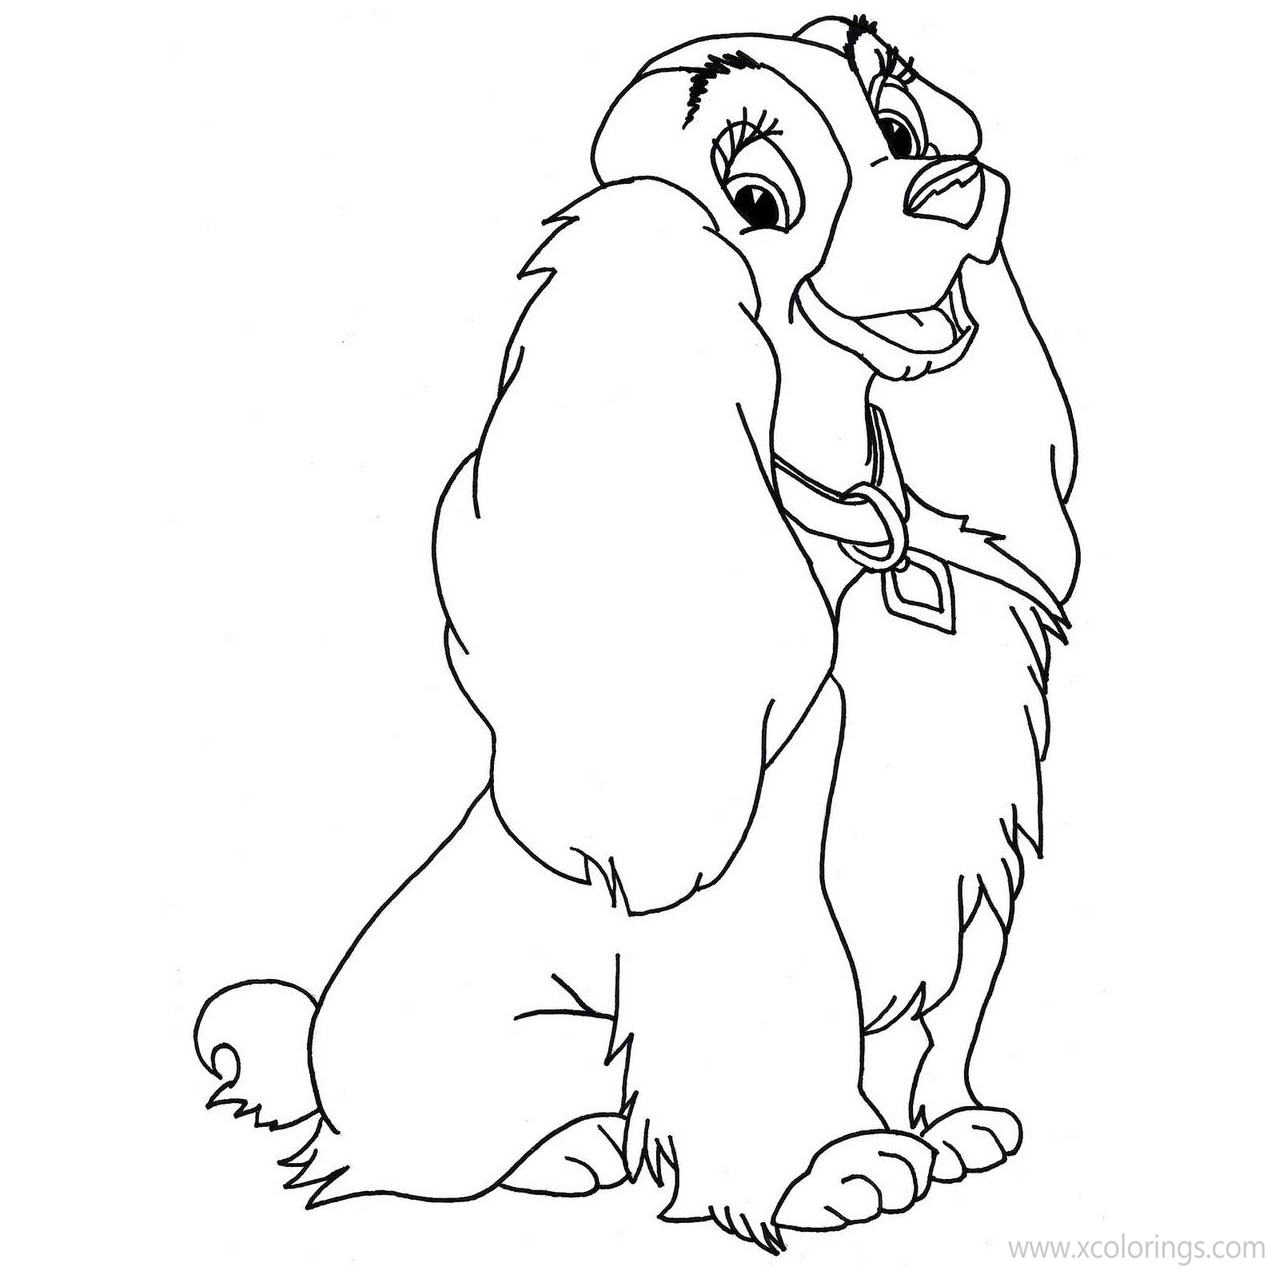 Free Happy Lady and the Tramp Coloring Pages printable